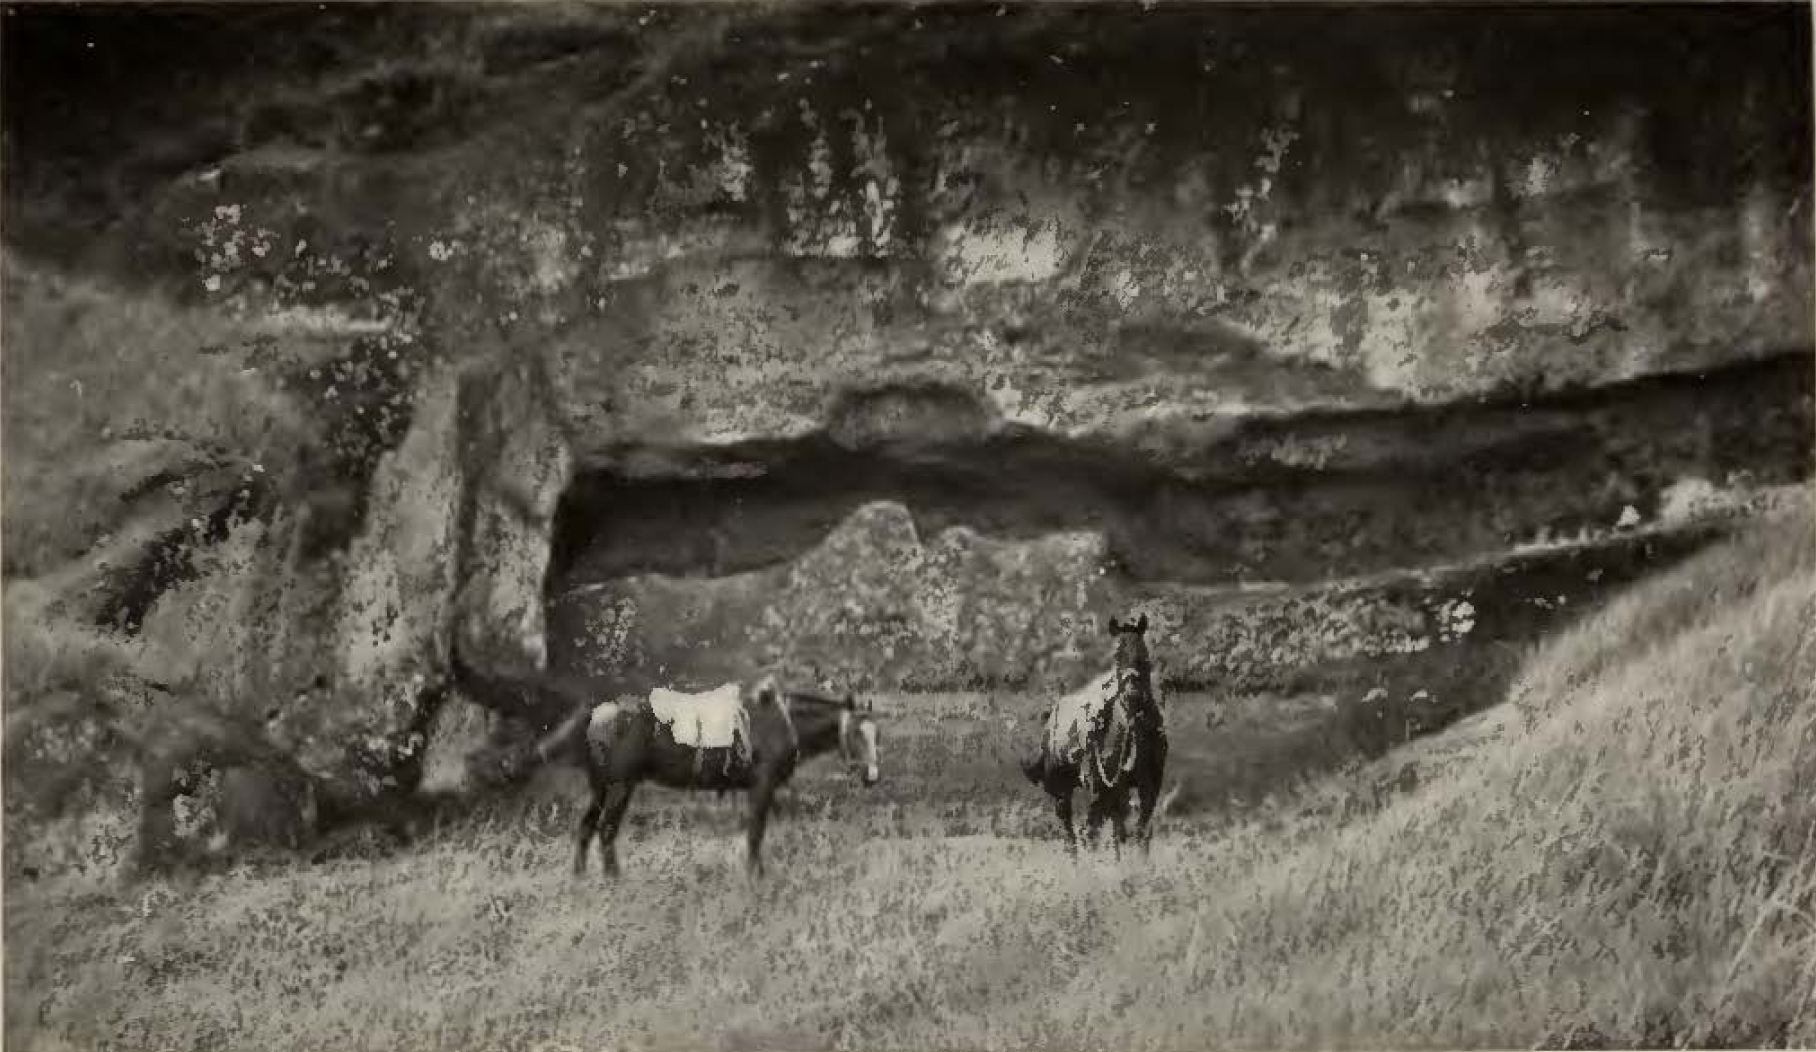 two horses in front of a stone face partially hollowed out in the shape of a head